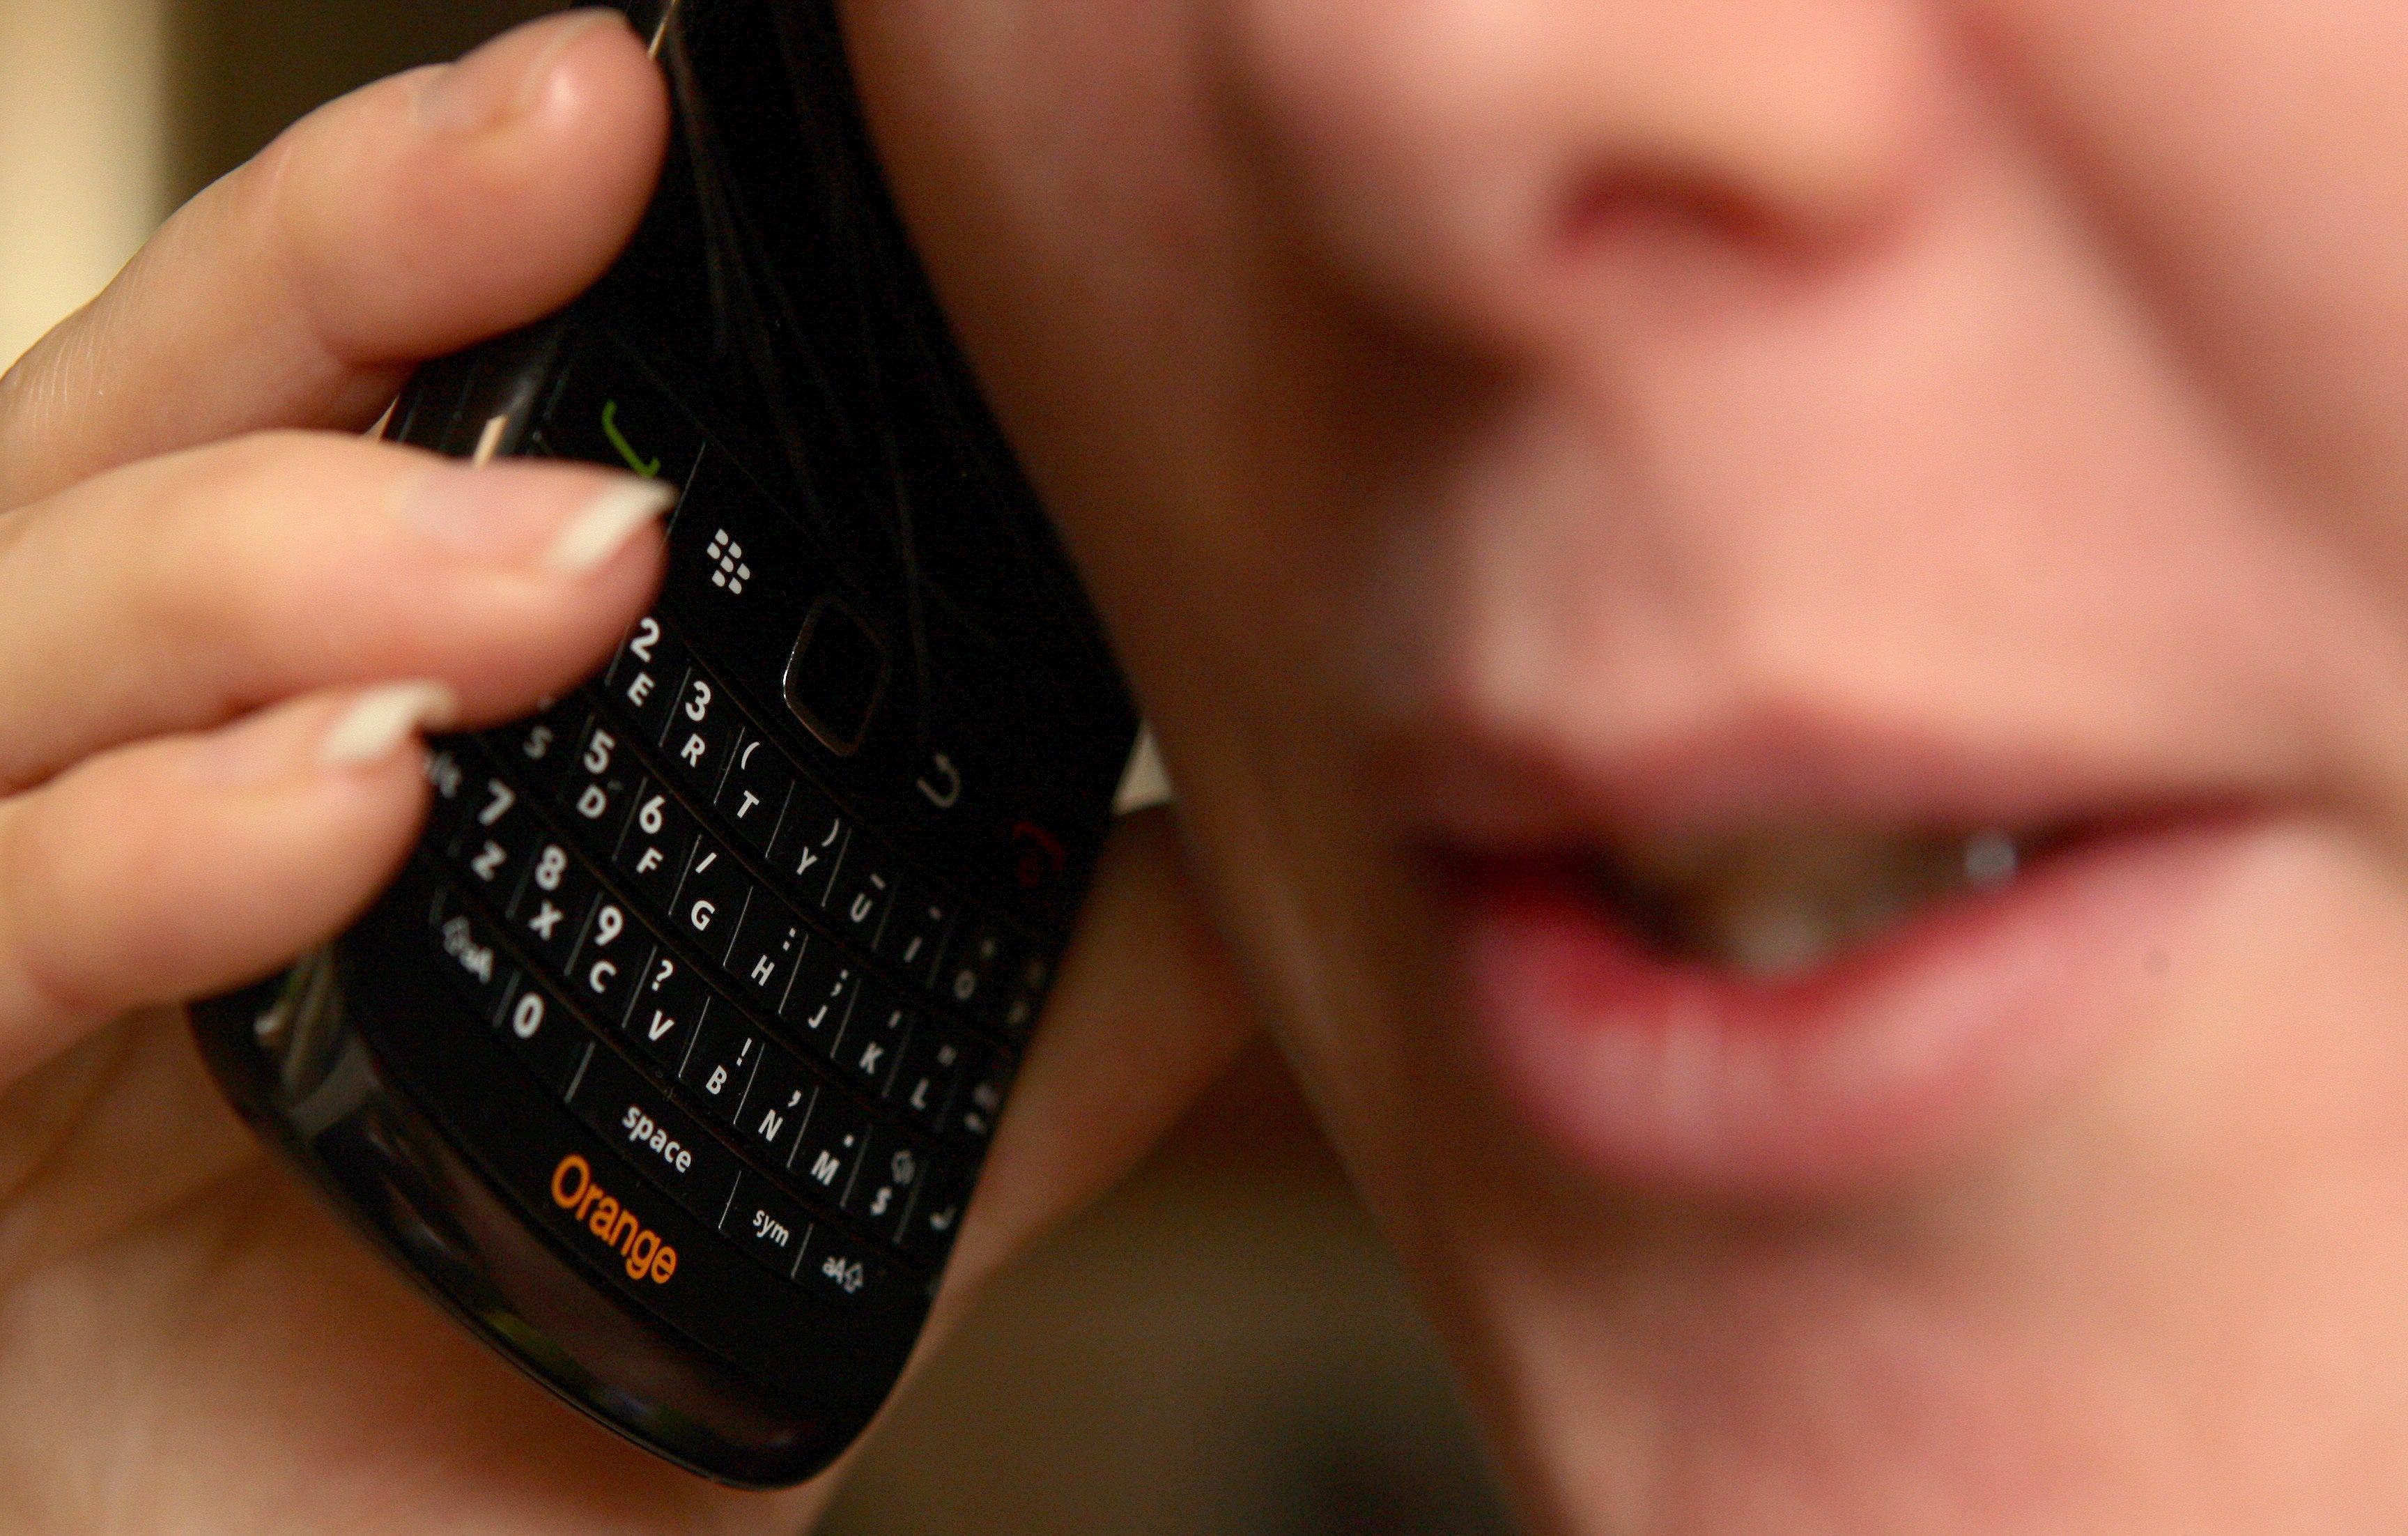 Five companies who pressurised people with marketing phone calls have been fined